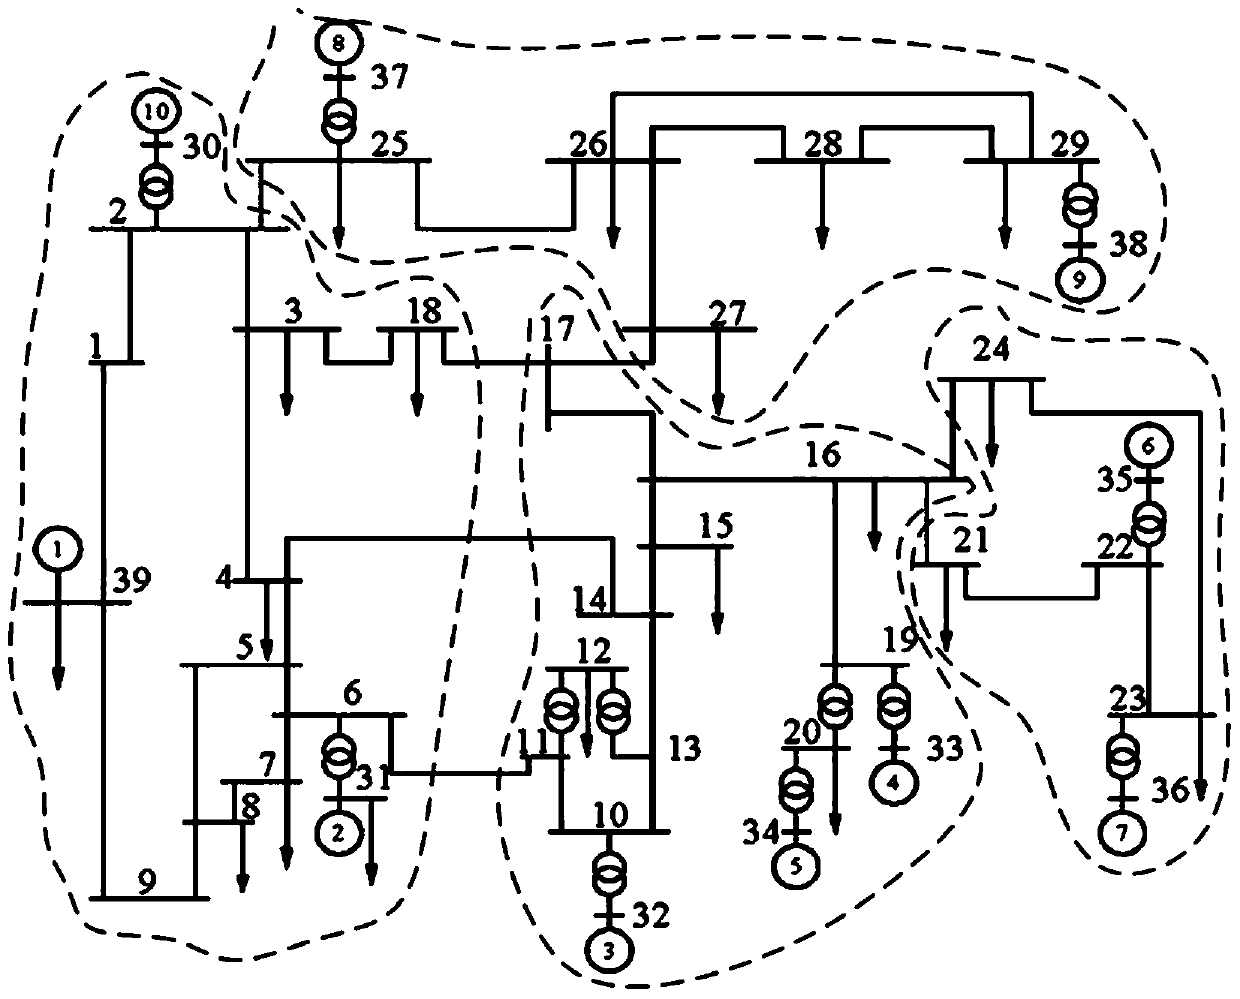 A method for power system partitioning